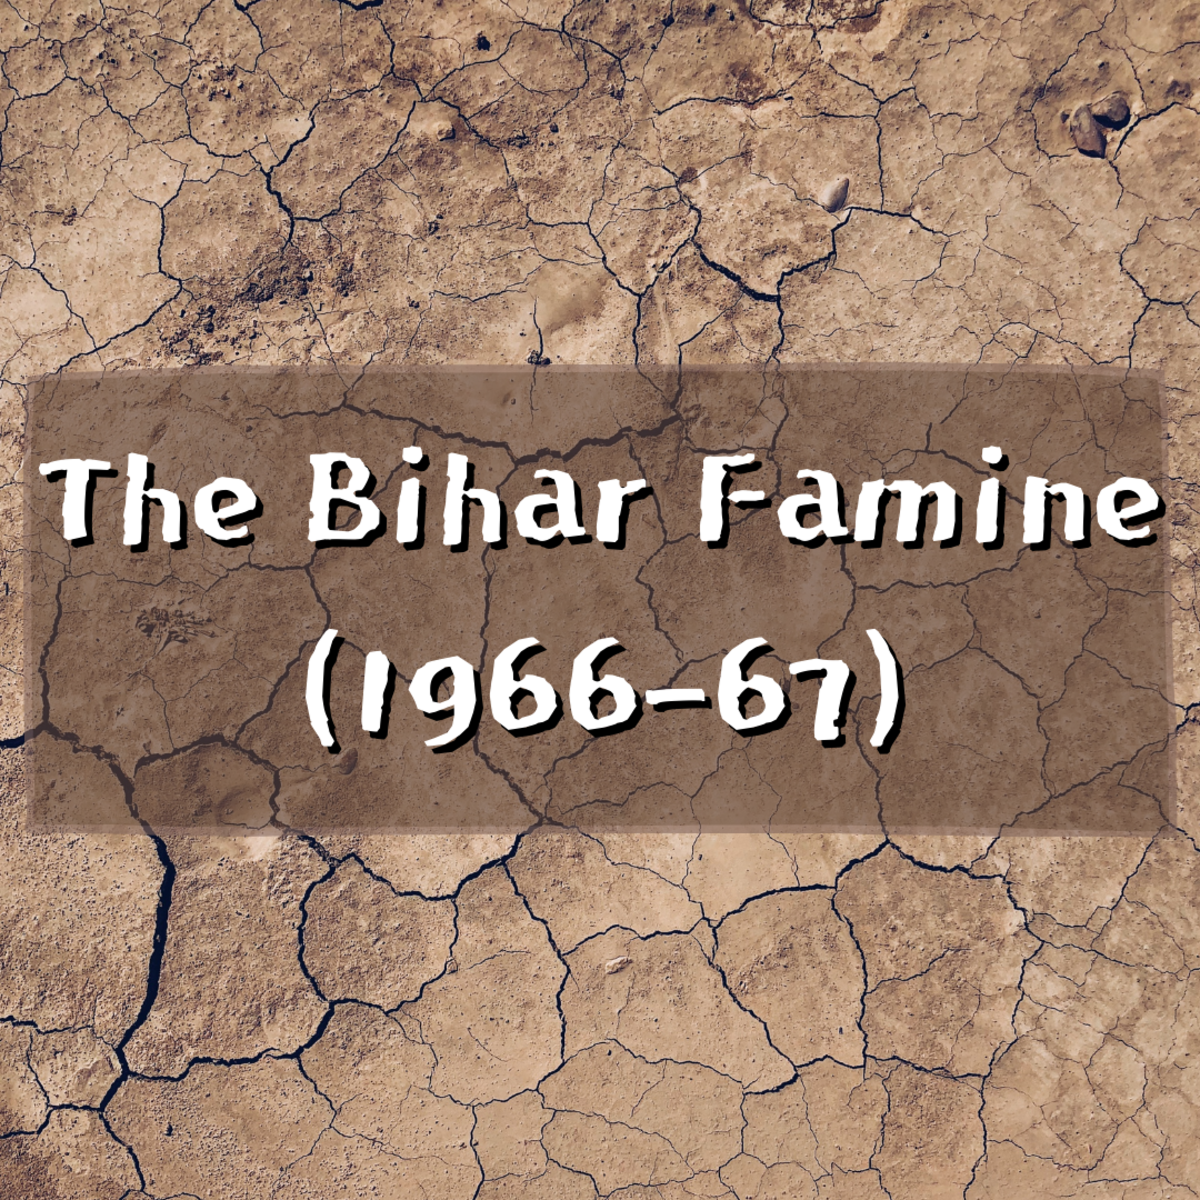 In this article, you'll learn all about the Bihar Famine of India, U.S. President Lyndon Johnson's response to it, PL-480 and more.